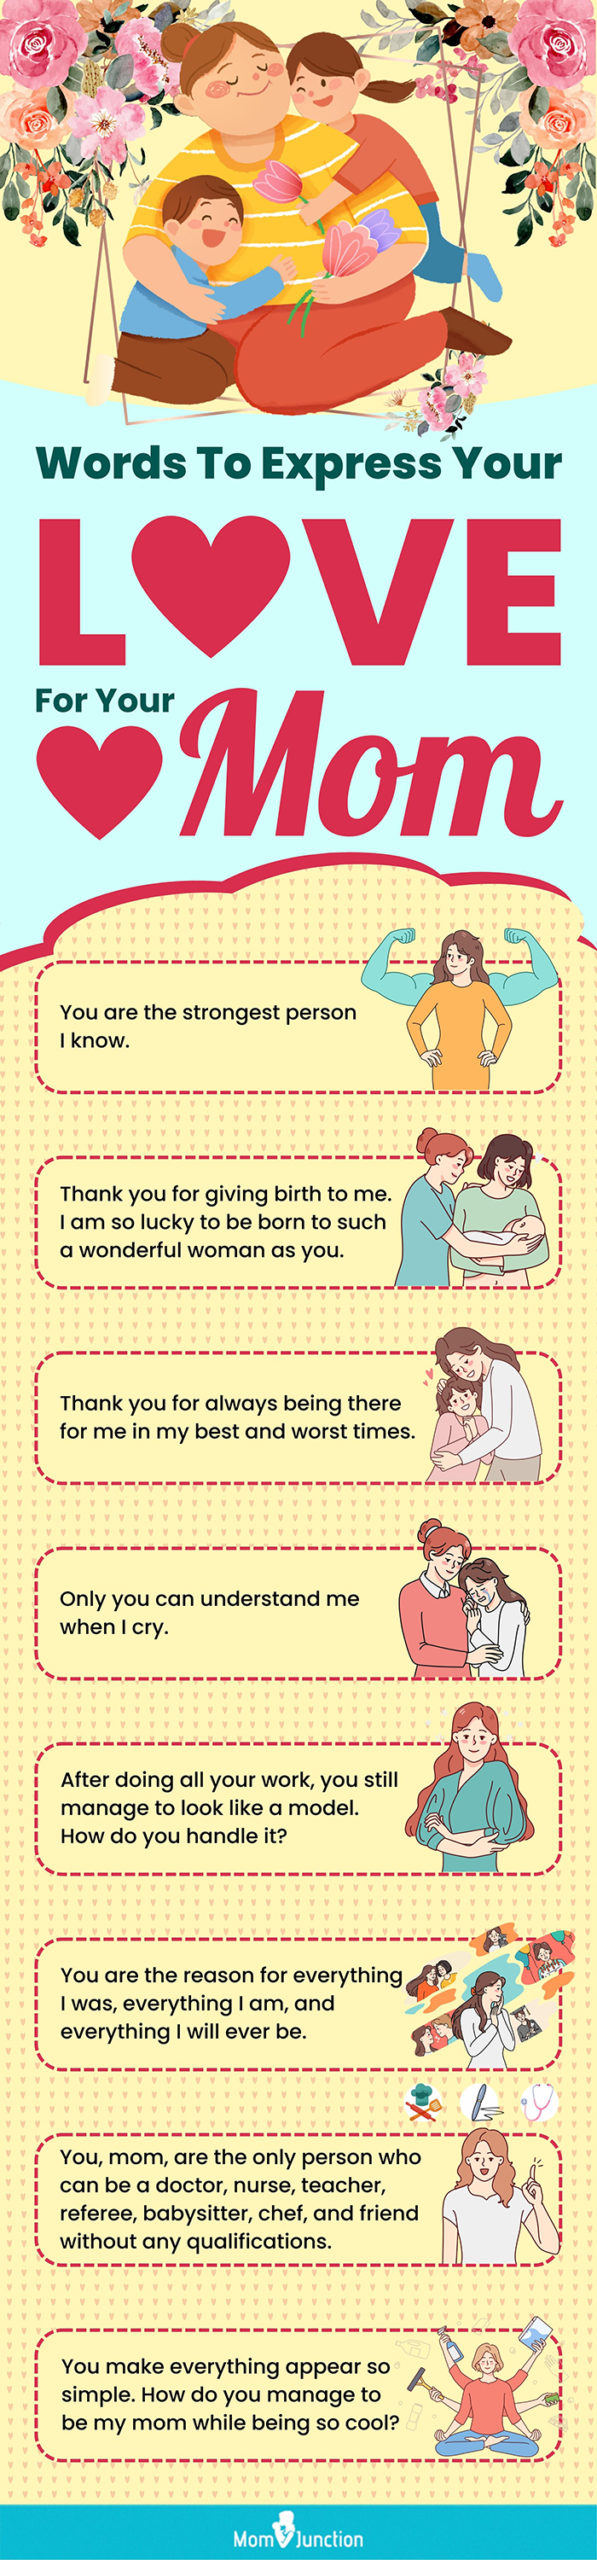 https://www.momjunction.com/wp-content/uploads/2022/12/Words-To-Express-Your-Love-For-Your-Mom-scaled.jpg